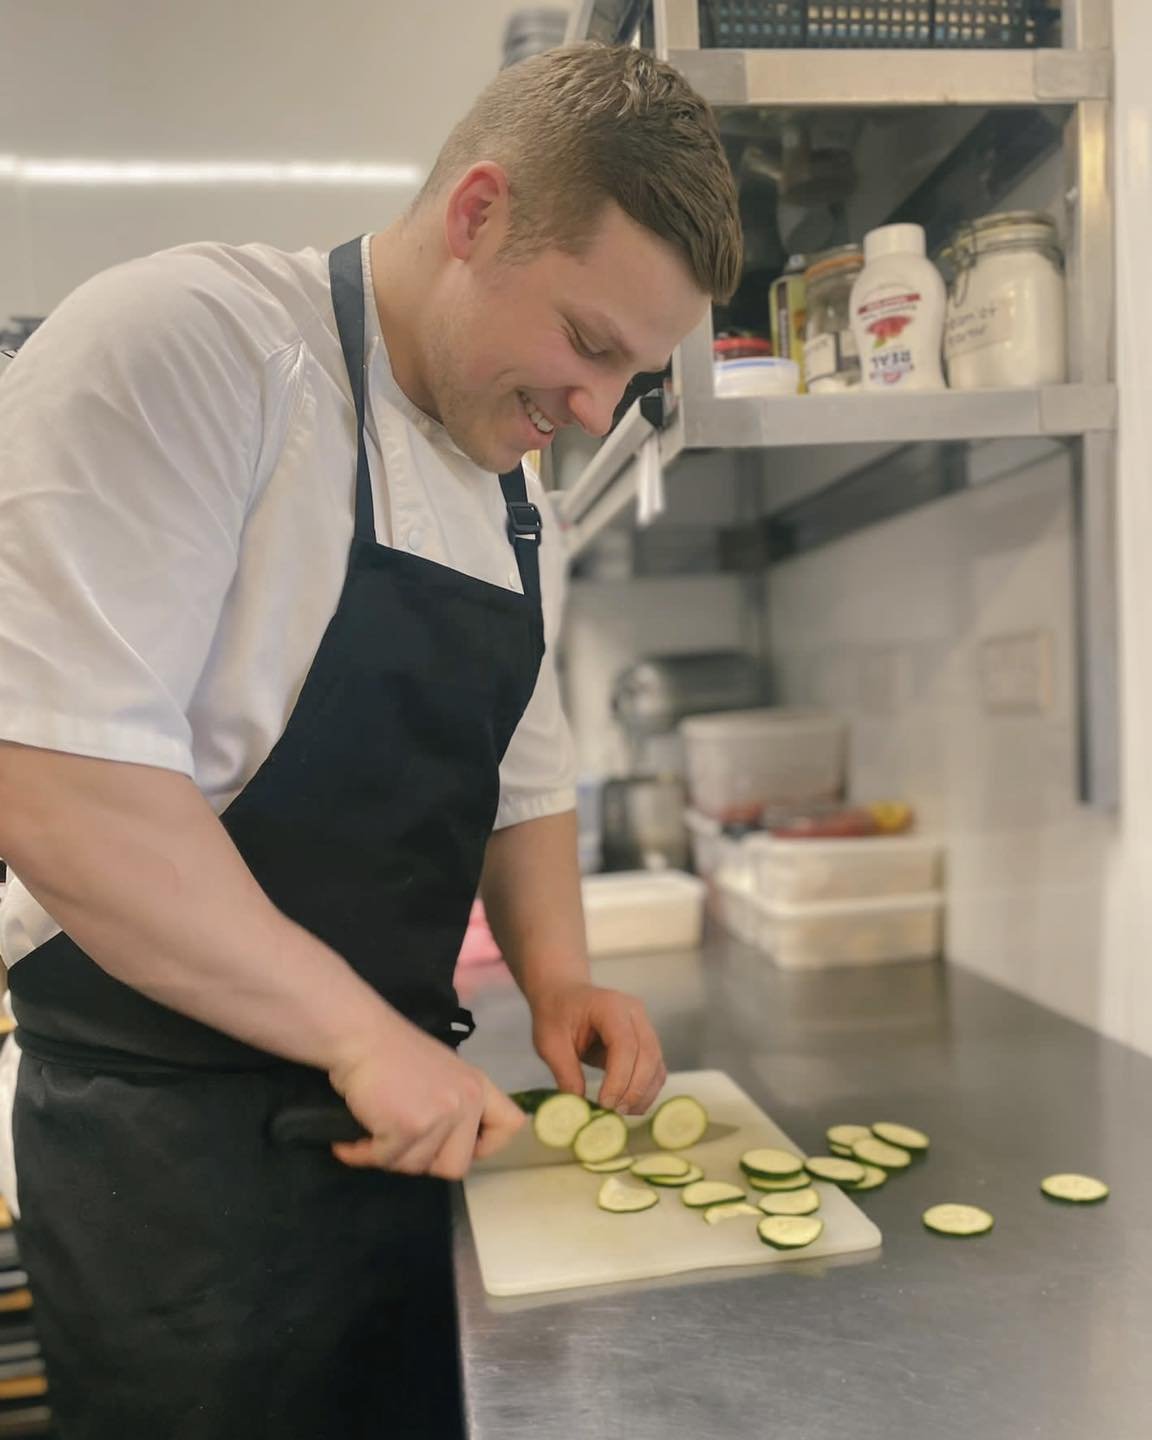 All the best to our Sam! 👨🏽&zwj;🍳

Sam has made it to the finals of North East&rsquo;s Young Chef of the Year, we are over the moon for him. Like Callum he has been spending lots of time perfecting his dishes for the finals at the end of May. Join